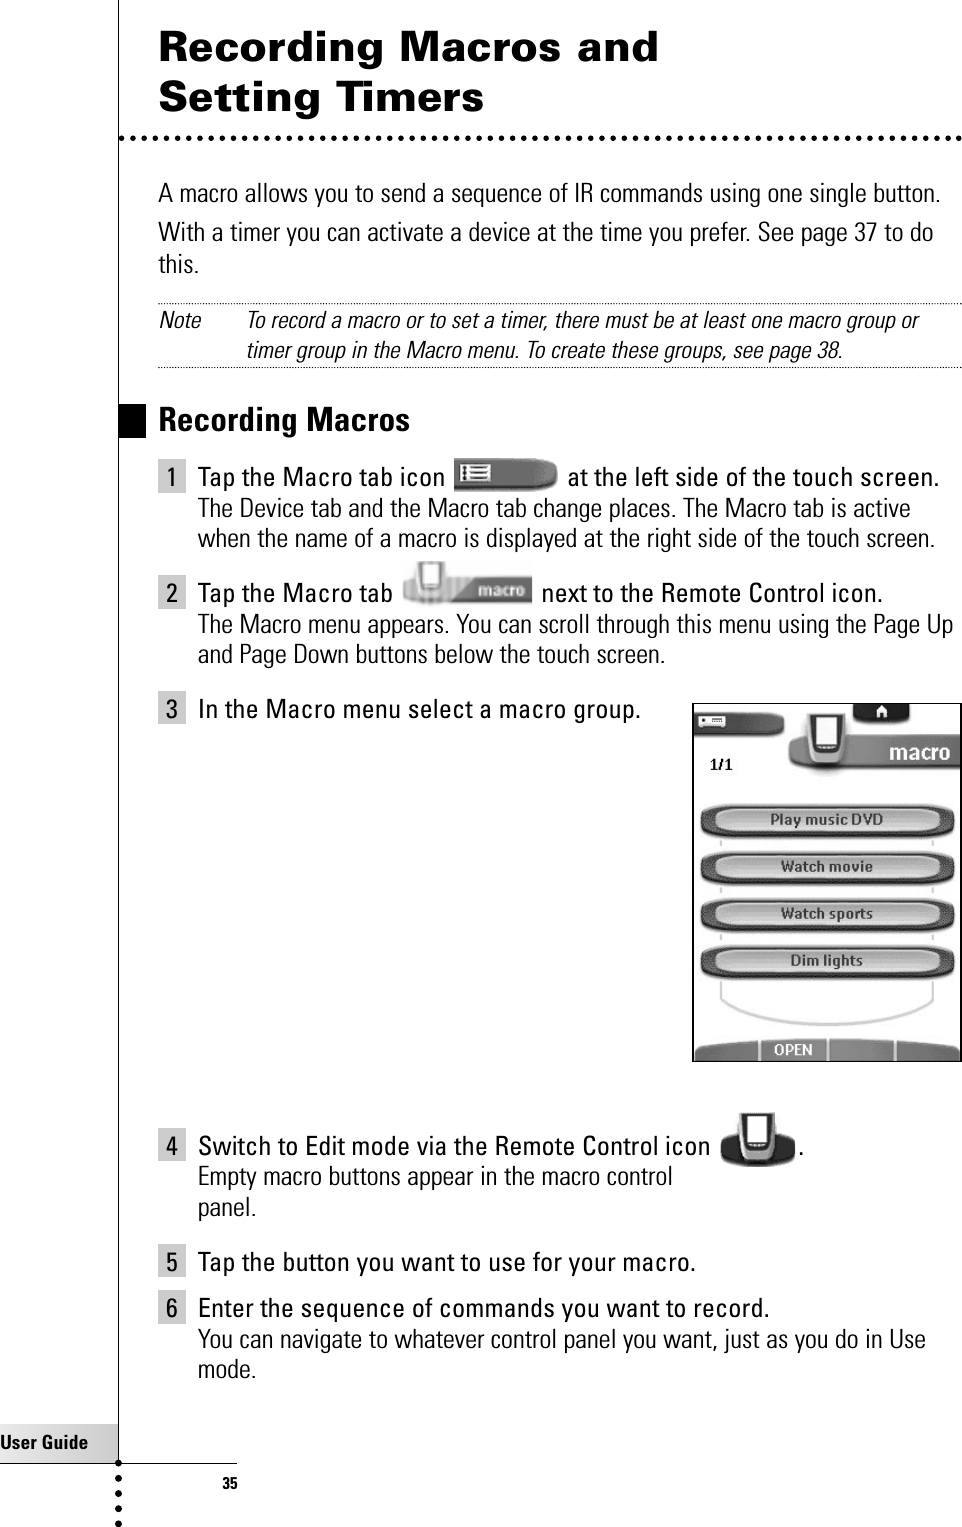 User Guide35Recording Macros and Setting TimersA macro allows you to send a sequence of IR commands using one single button.With a timer you can activate a device at the time you prefer. See page 37 to dothis.Note To record a macro or to set a timer, there must be at least one macro group ortimer group in the Macro menu. To create these groups, see page 38.Recording Macros1 Tap the Macro tab icon  at the left side of the touch screen. The Device tab and the Macro tab change places. The Macro tab is activewhen the name of a macro is displayed at the right side of the touch screen.2 Tap the Macro tab  next to the Remote Control icon.The Macro menu appears. You can scroll through this menu using the Page Upand Page Down buttons below the touch screen.3 In the Macro menu select a macro group.4 Switch to Edit mode via the Remote Control icon  .Empty macro buttons appear in the macro controlpanel.5 Tap the button you want to use for your macro.6 Enter the sequence of commands you want to record.You can navigate to whatever control panel you want, just as you do in Usemode.Getting the Maximum out of it